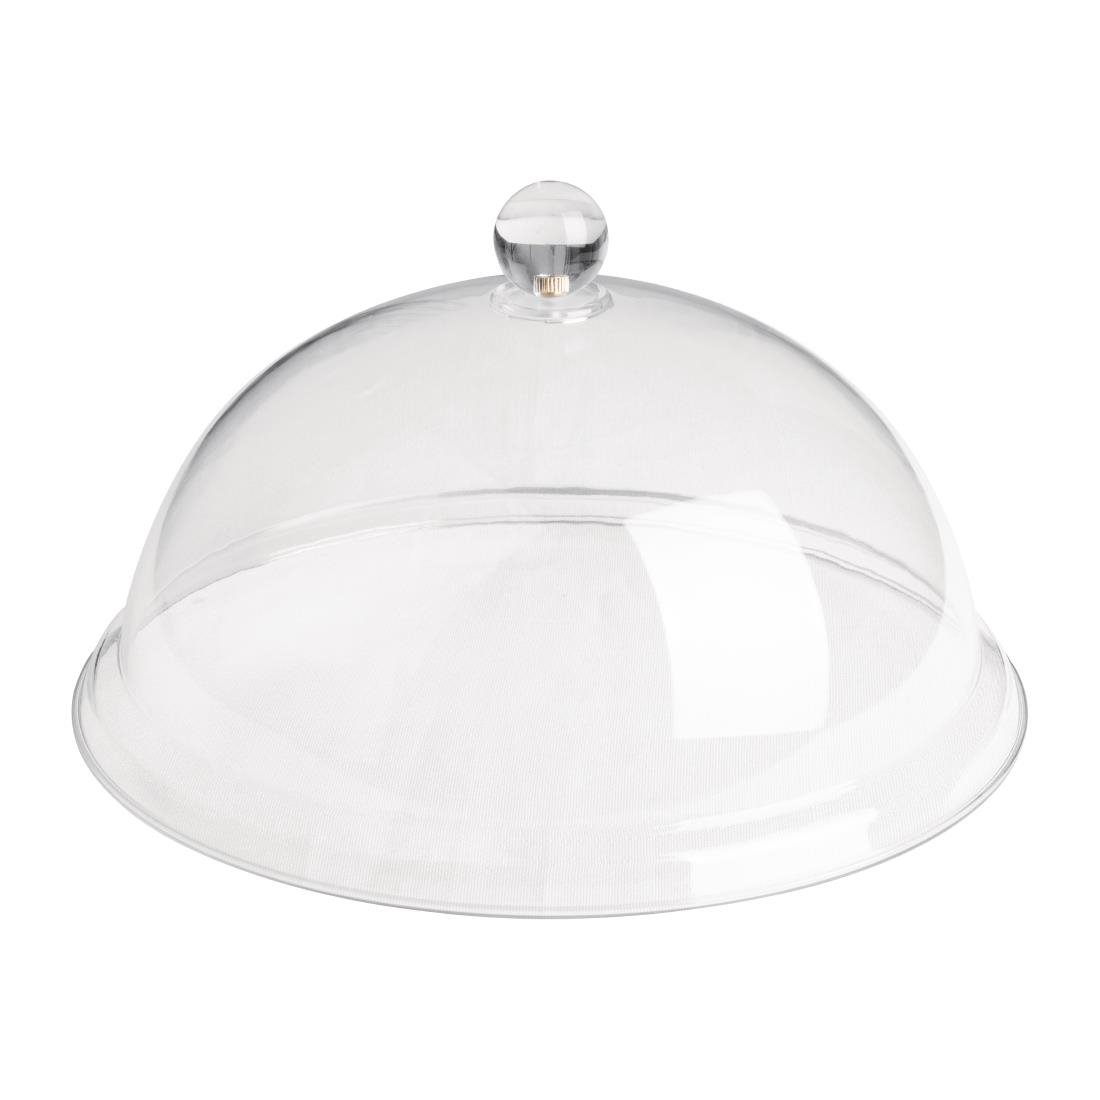 Olympia Kristallon Polycarbonate Domed Cover Clear 260(Ø) x 115(H)mm